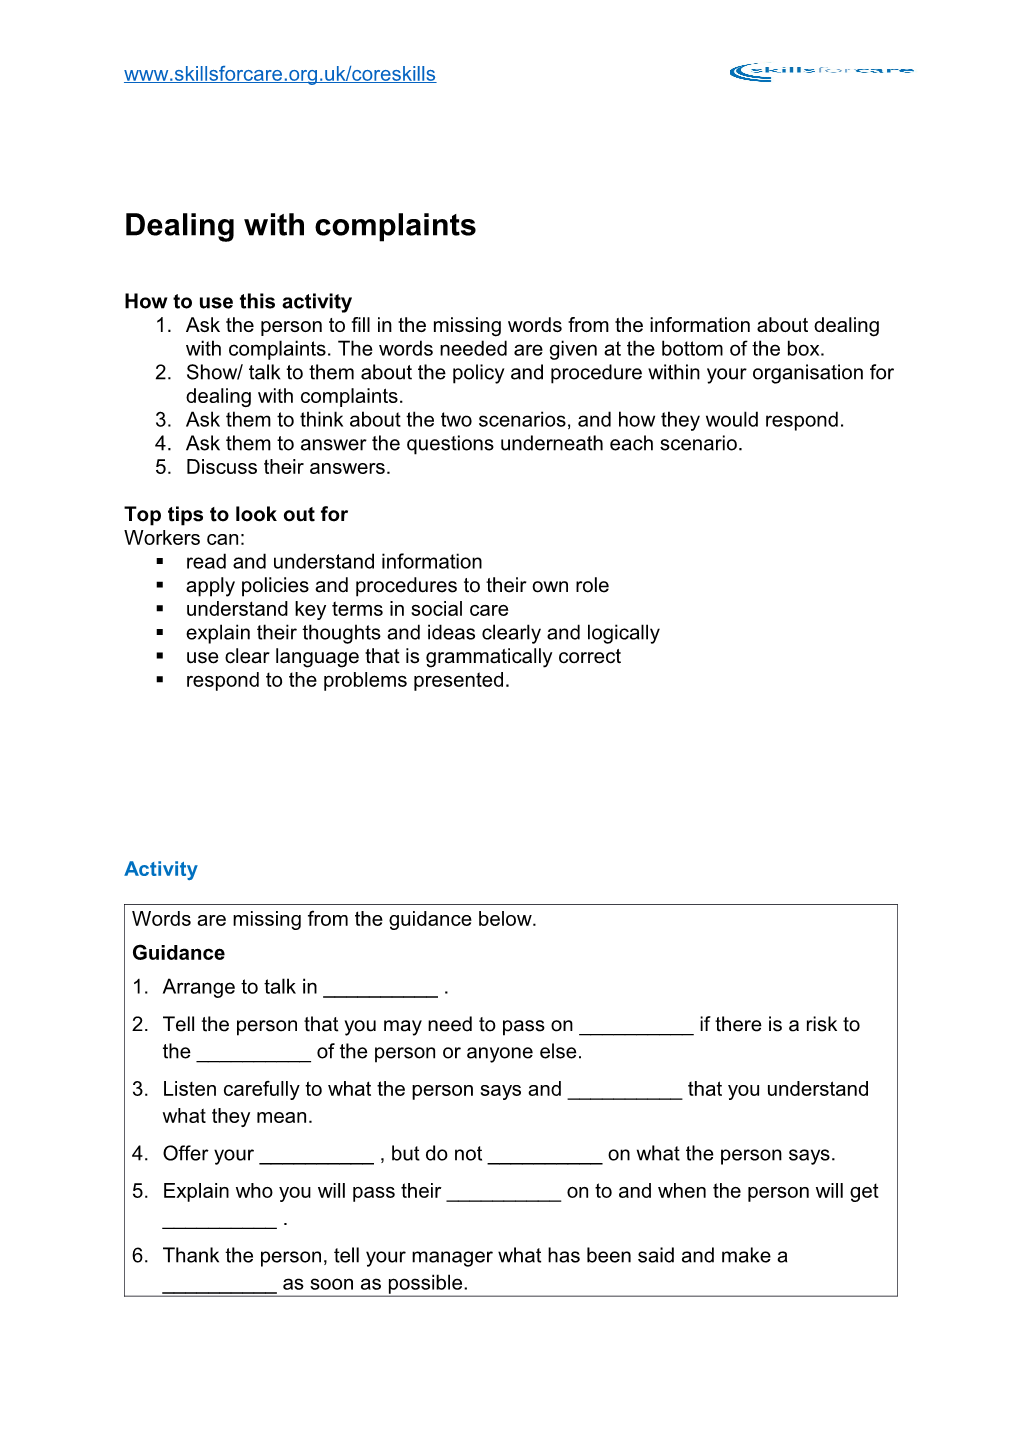 Dealing with Complaints